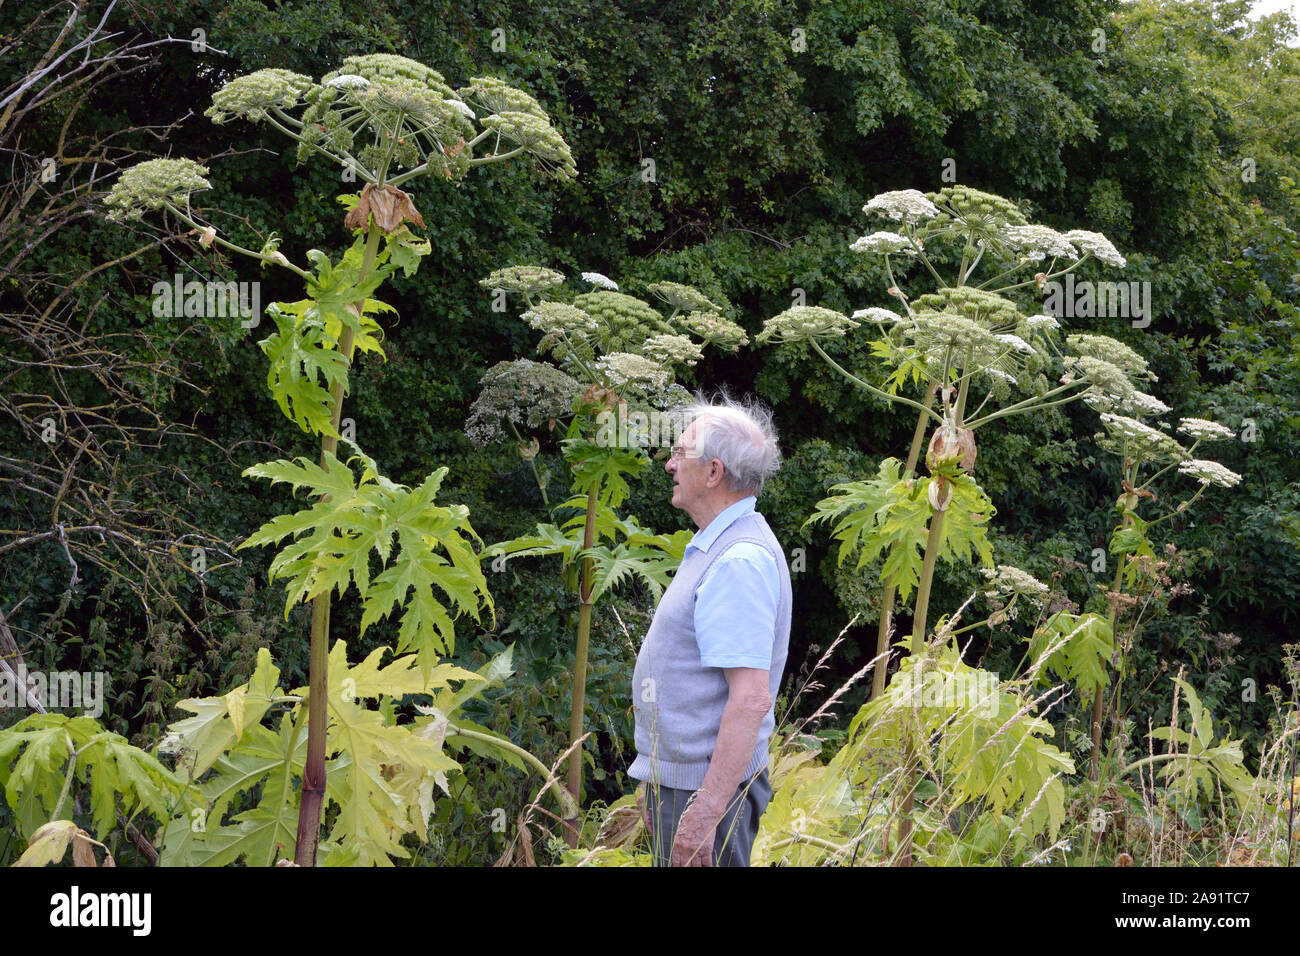 Heracleum mantegazzianum (giant hogweed) is a giant member of the parsley family (Apiaceae) native to the western Caucasus region. Stock Photo